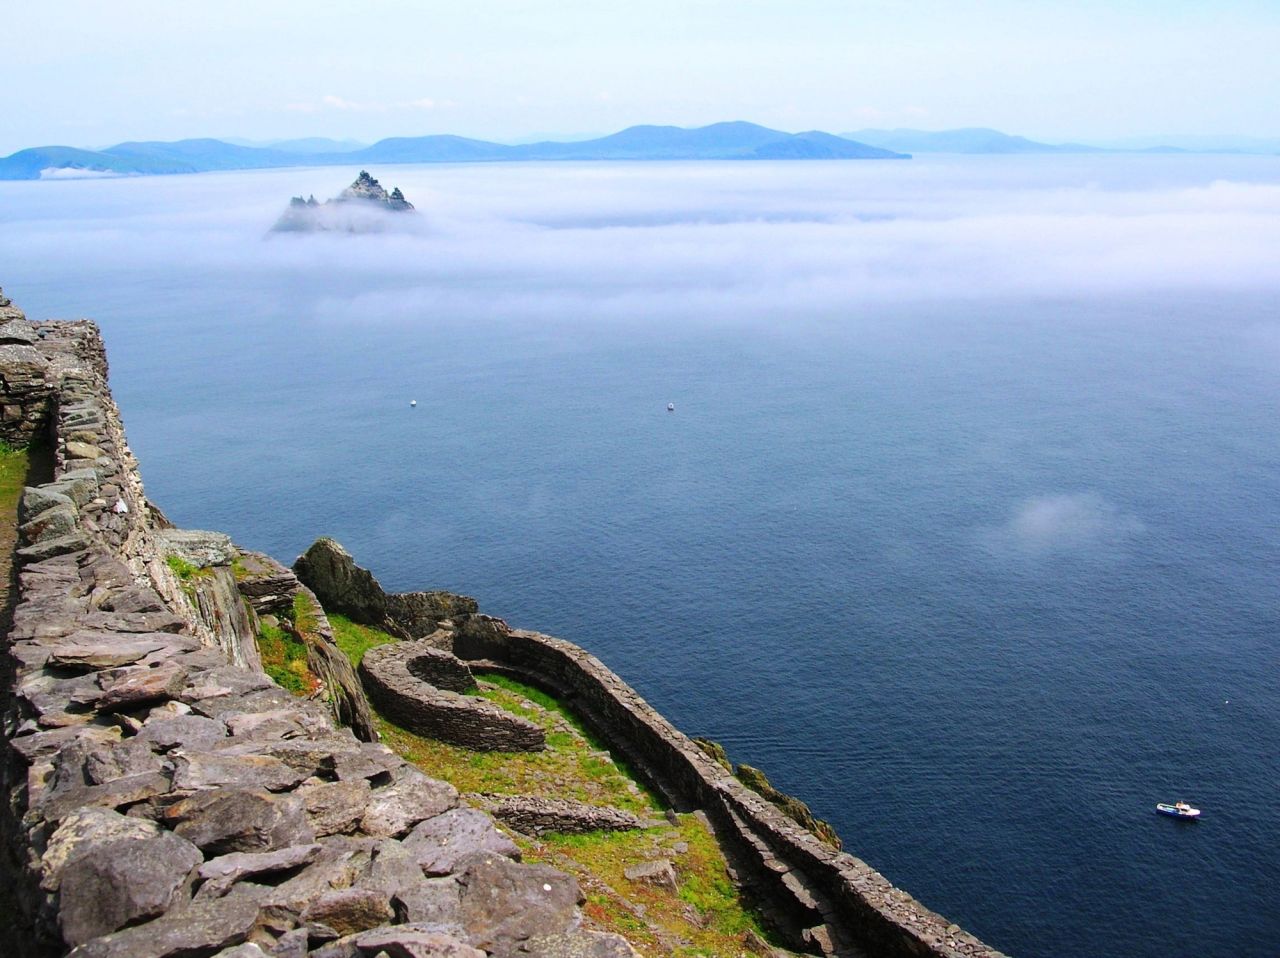 This photo, taken from Skellig Michael, shows Little Skellig rising from the mist. The two dramatic sea crags are located 12 kilometers west of Ivereagh Peninsula in Ireland's County Kerry. 